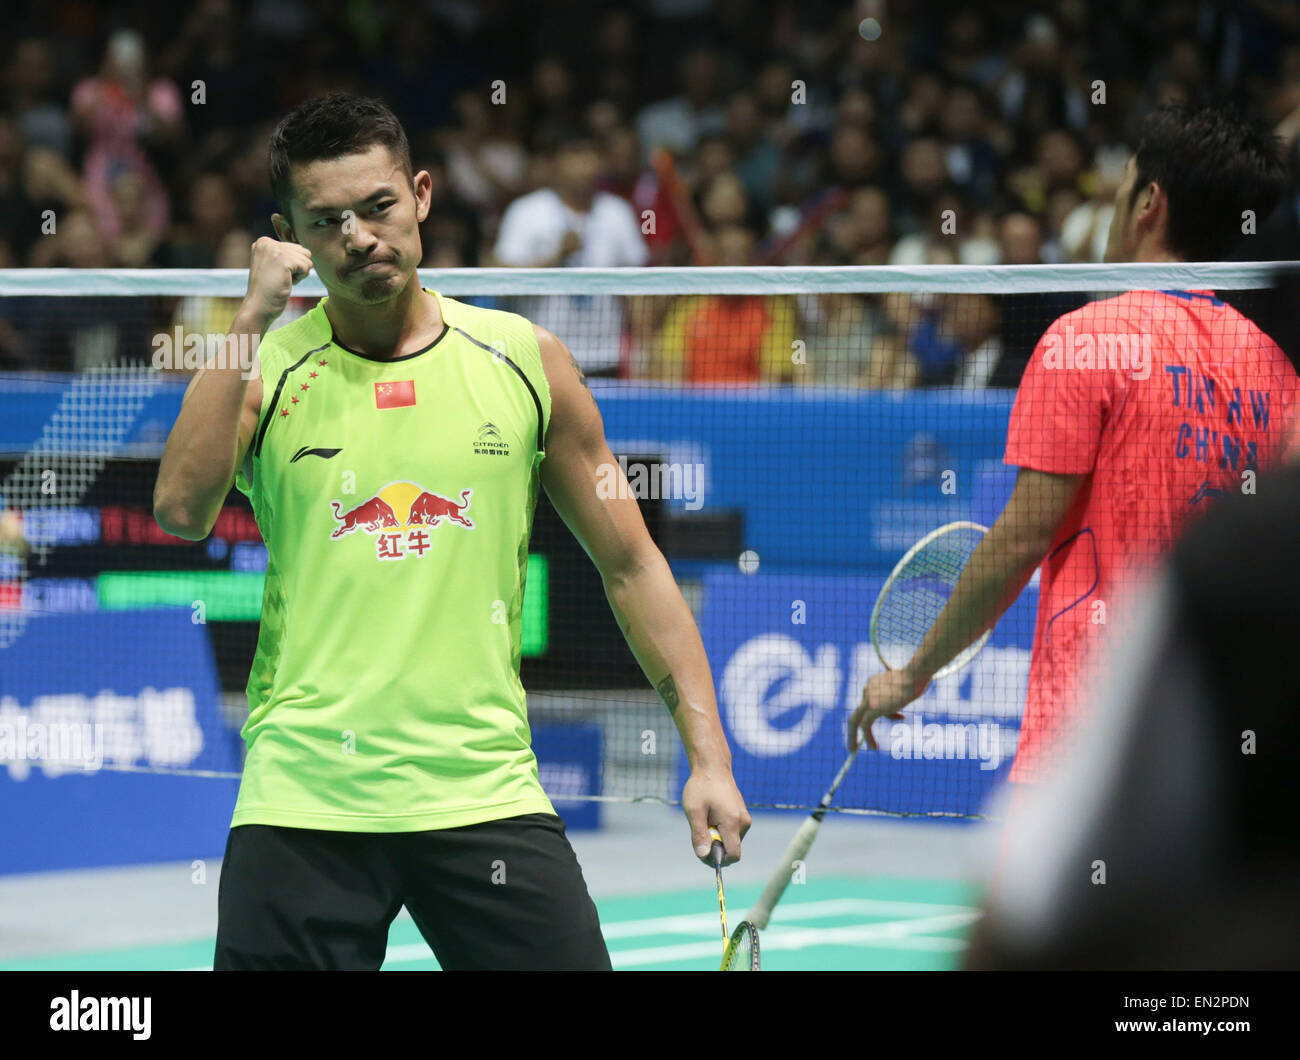 Dong Feng Citroen Badminton Asia Championships 2015 in Wuhan, China on April 26, 2015.Lin Dan of China celebrates after defeating Tian Houwei of China during their men's singles final match. Stock Photo